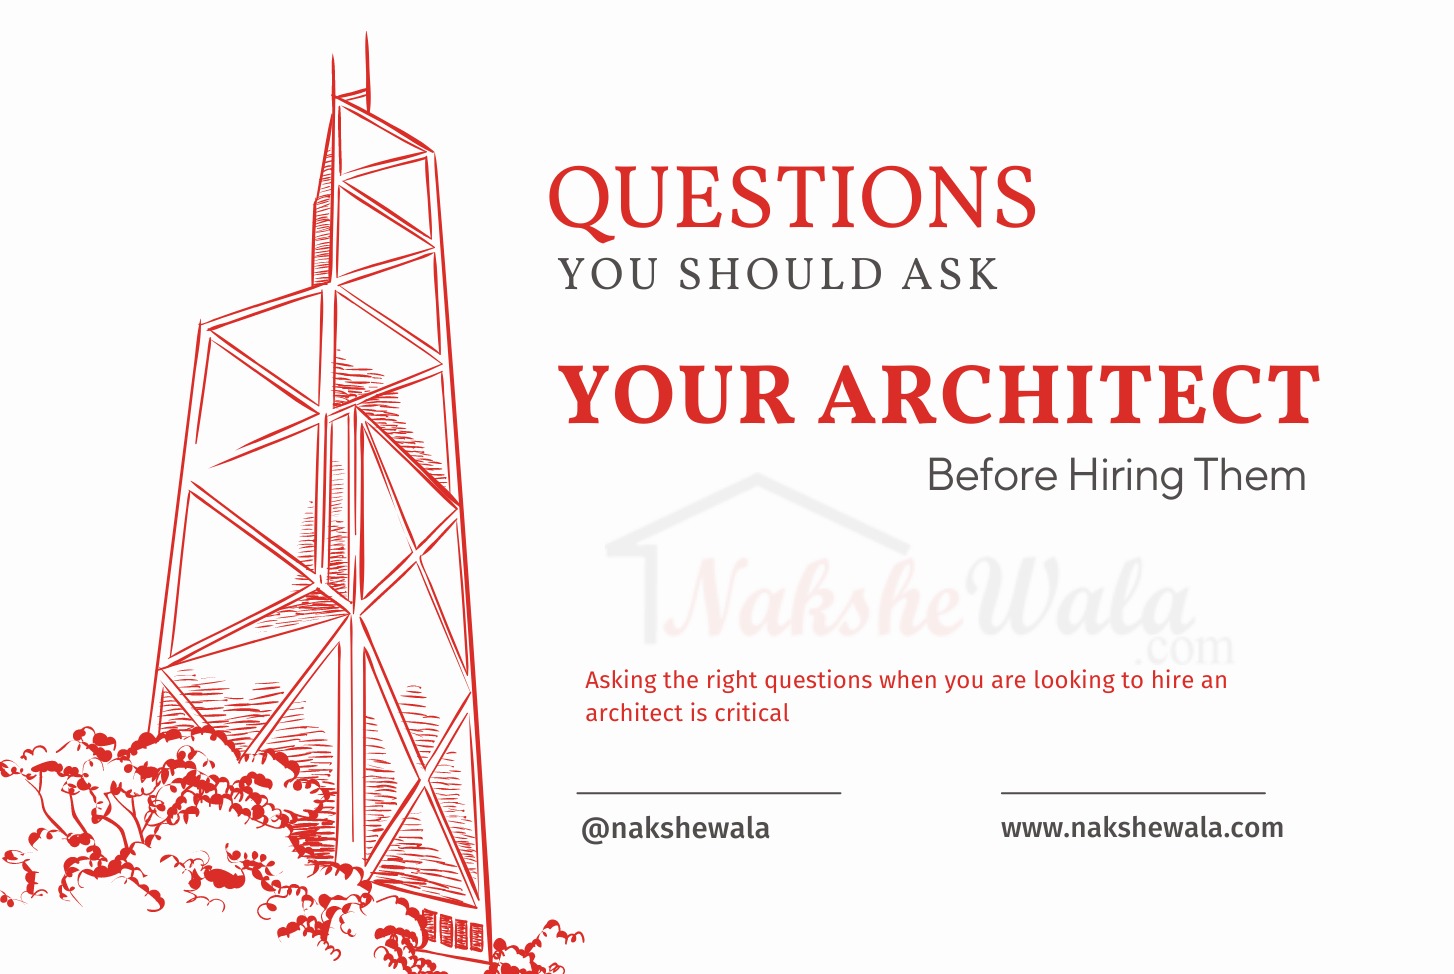 Questions You Should Ask Your Architect Before Hiring Them